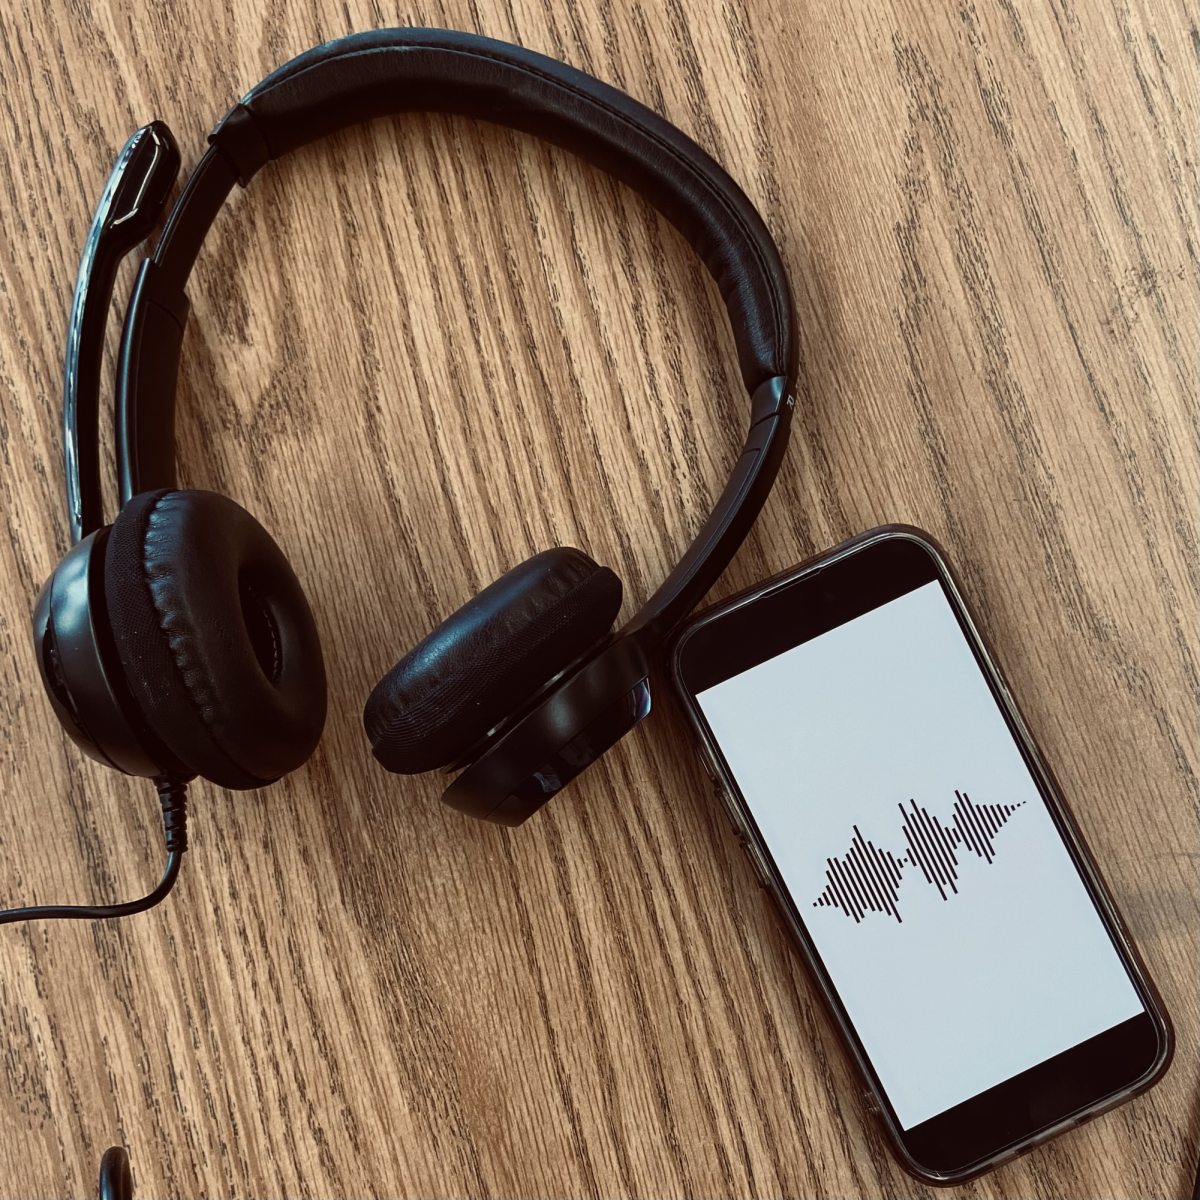 Is Listening To An Audiobook The Same As Reading A Book?